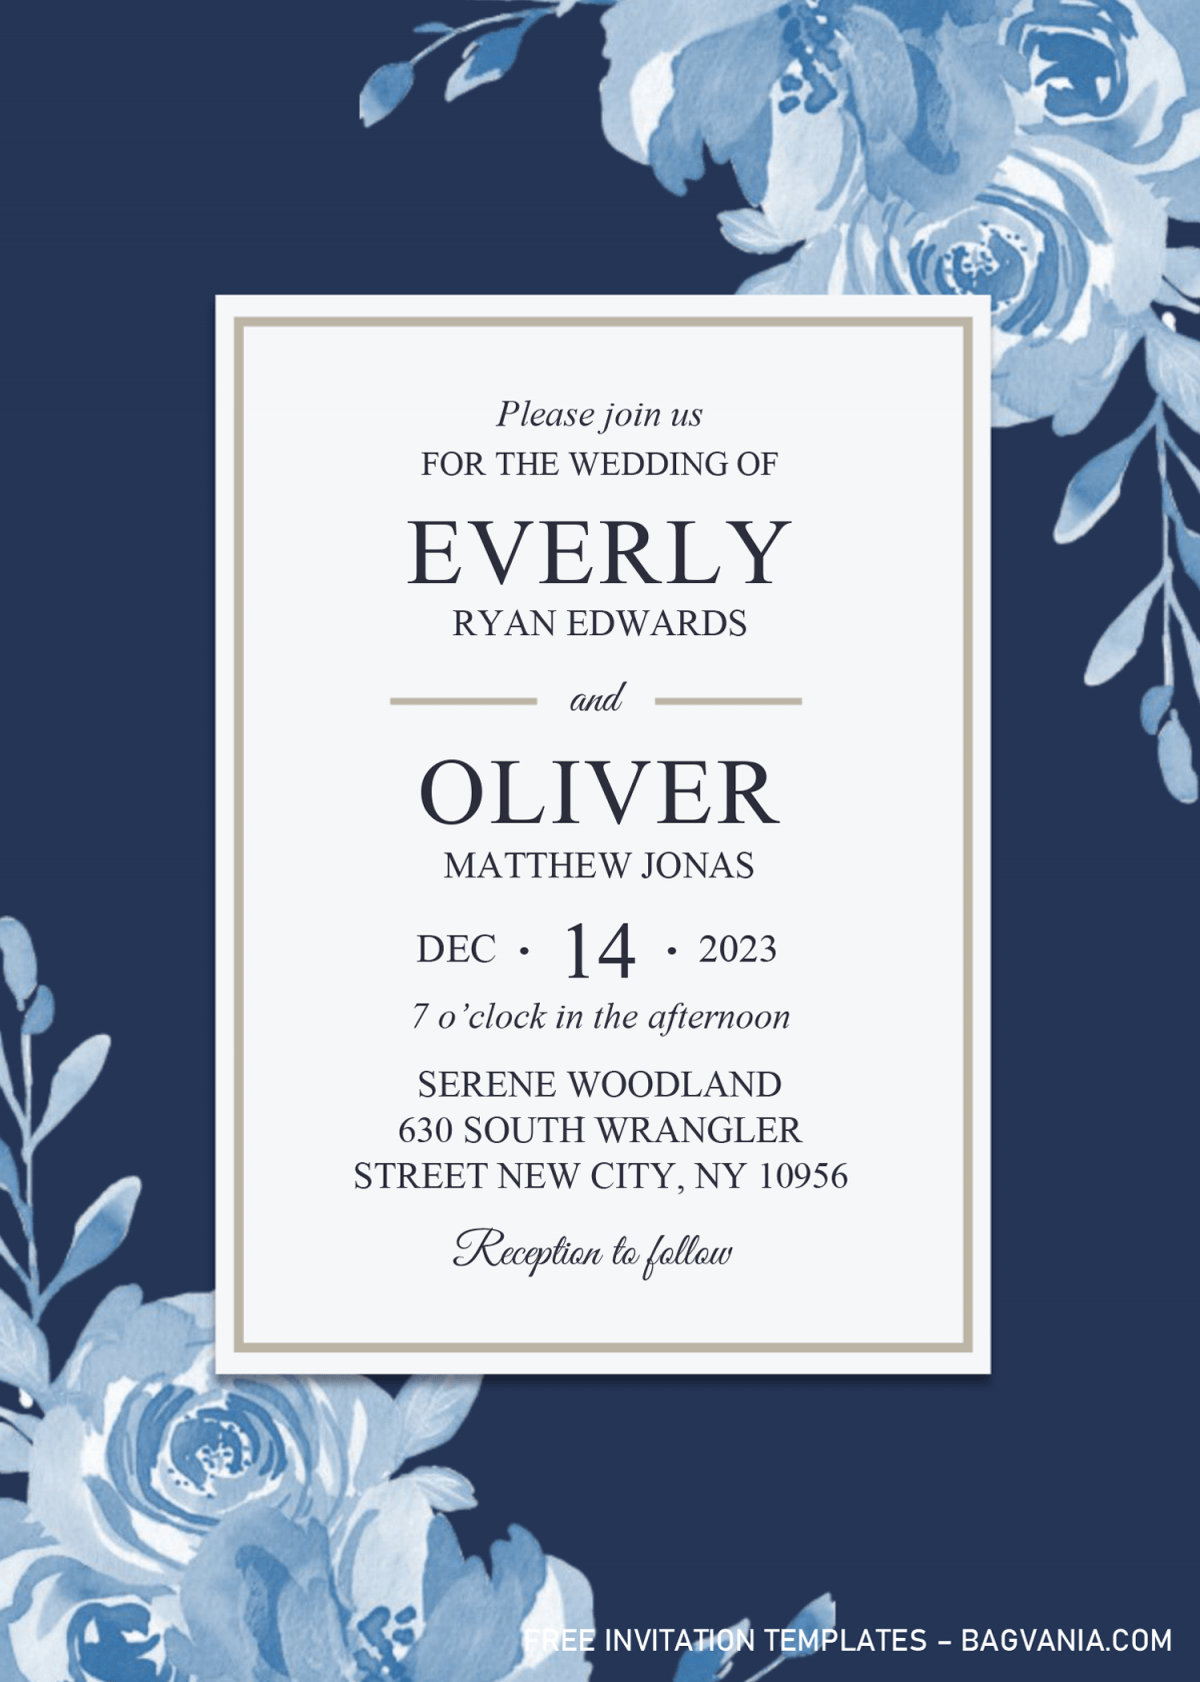 Modern Navy Invitation Templates - Editable With Microsoft Word and has white rectangle text box